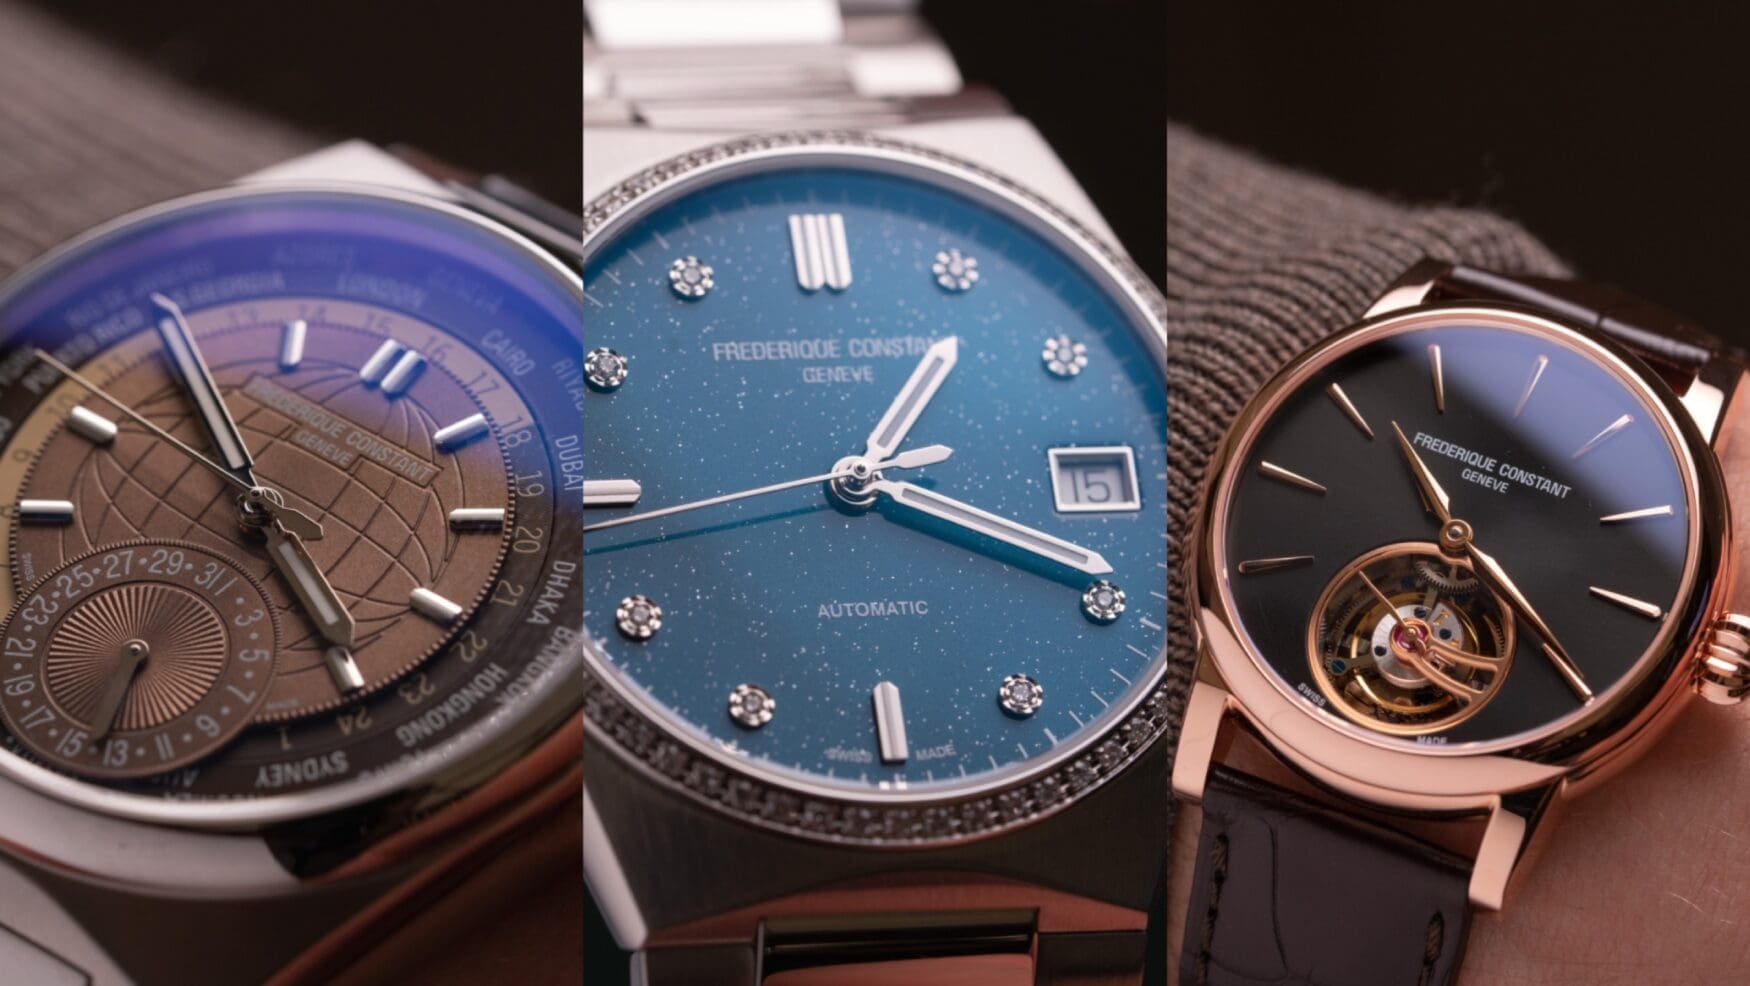 Frederique Constant celebrates 35 years with three new releases